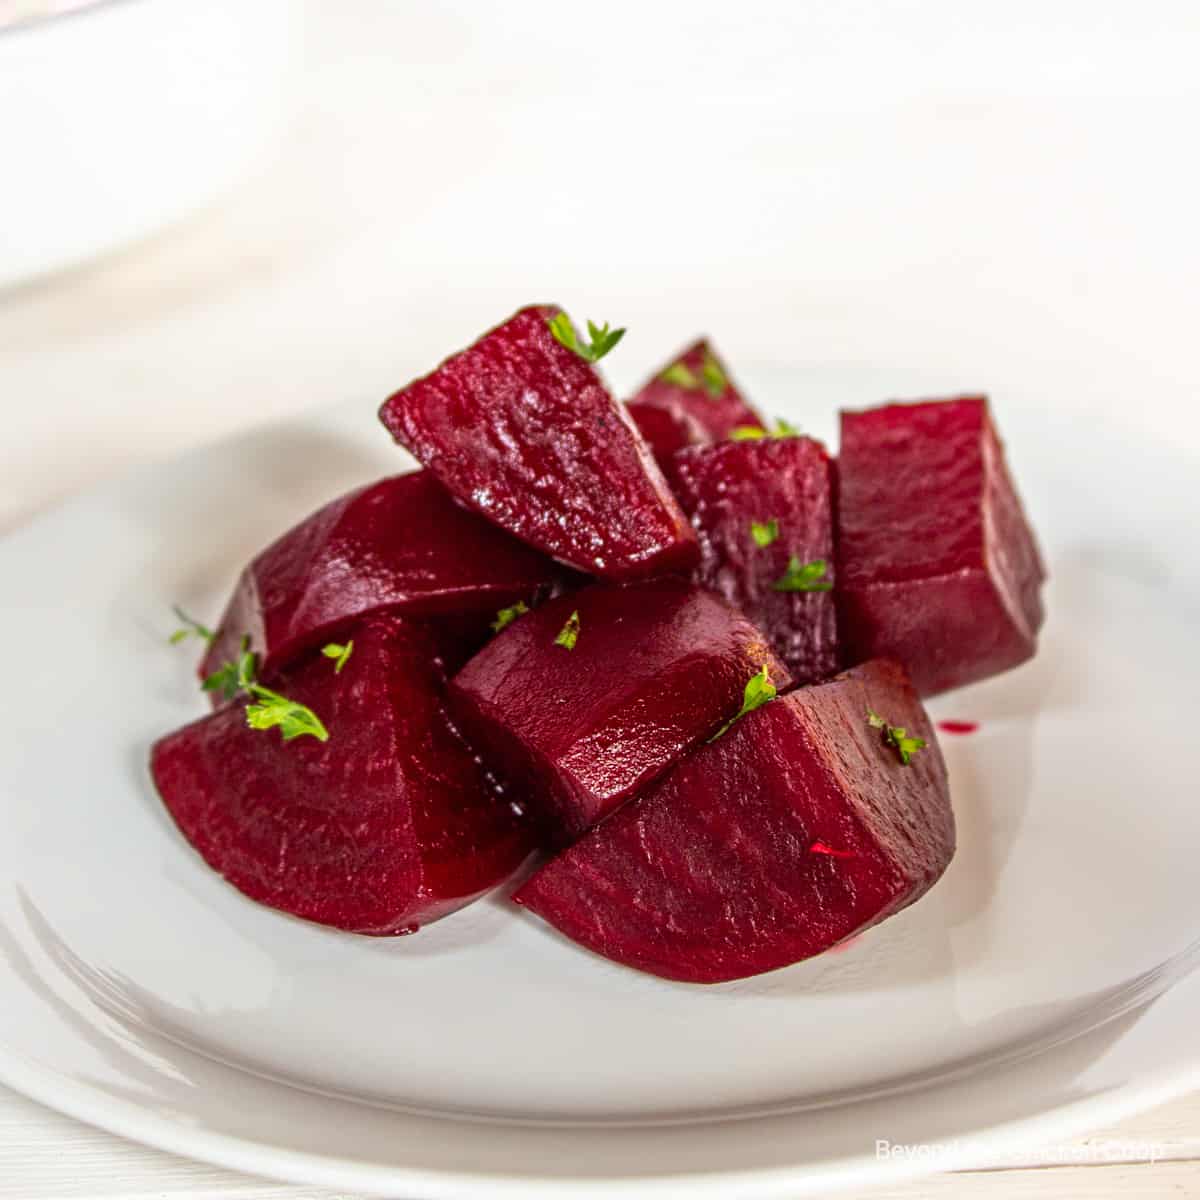 Cubed beets topped with fresh parsley on a white plate.